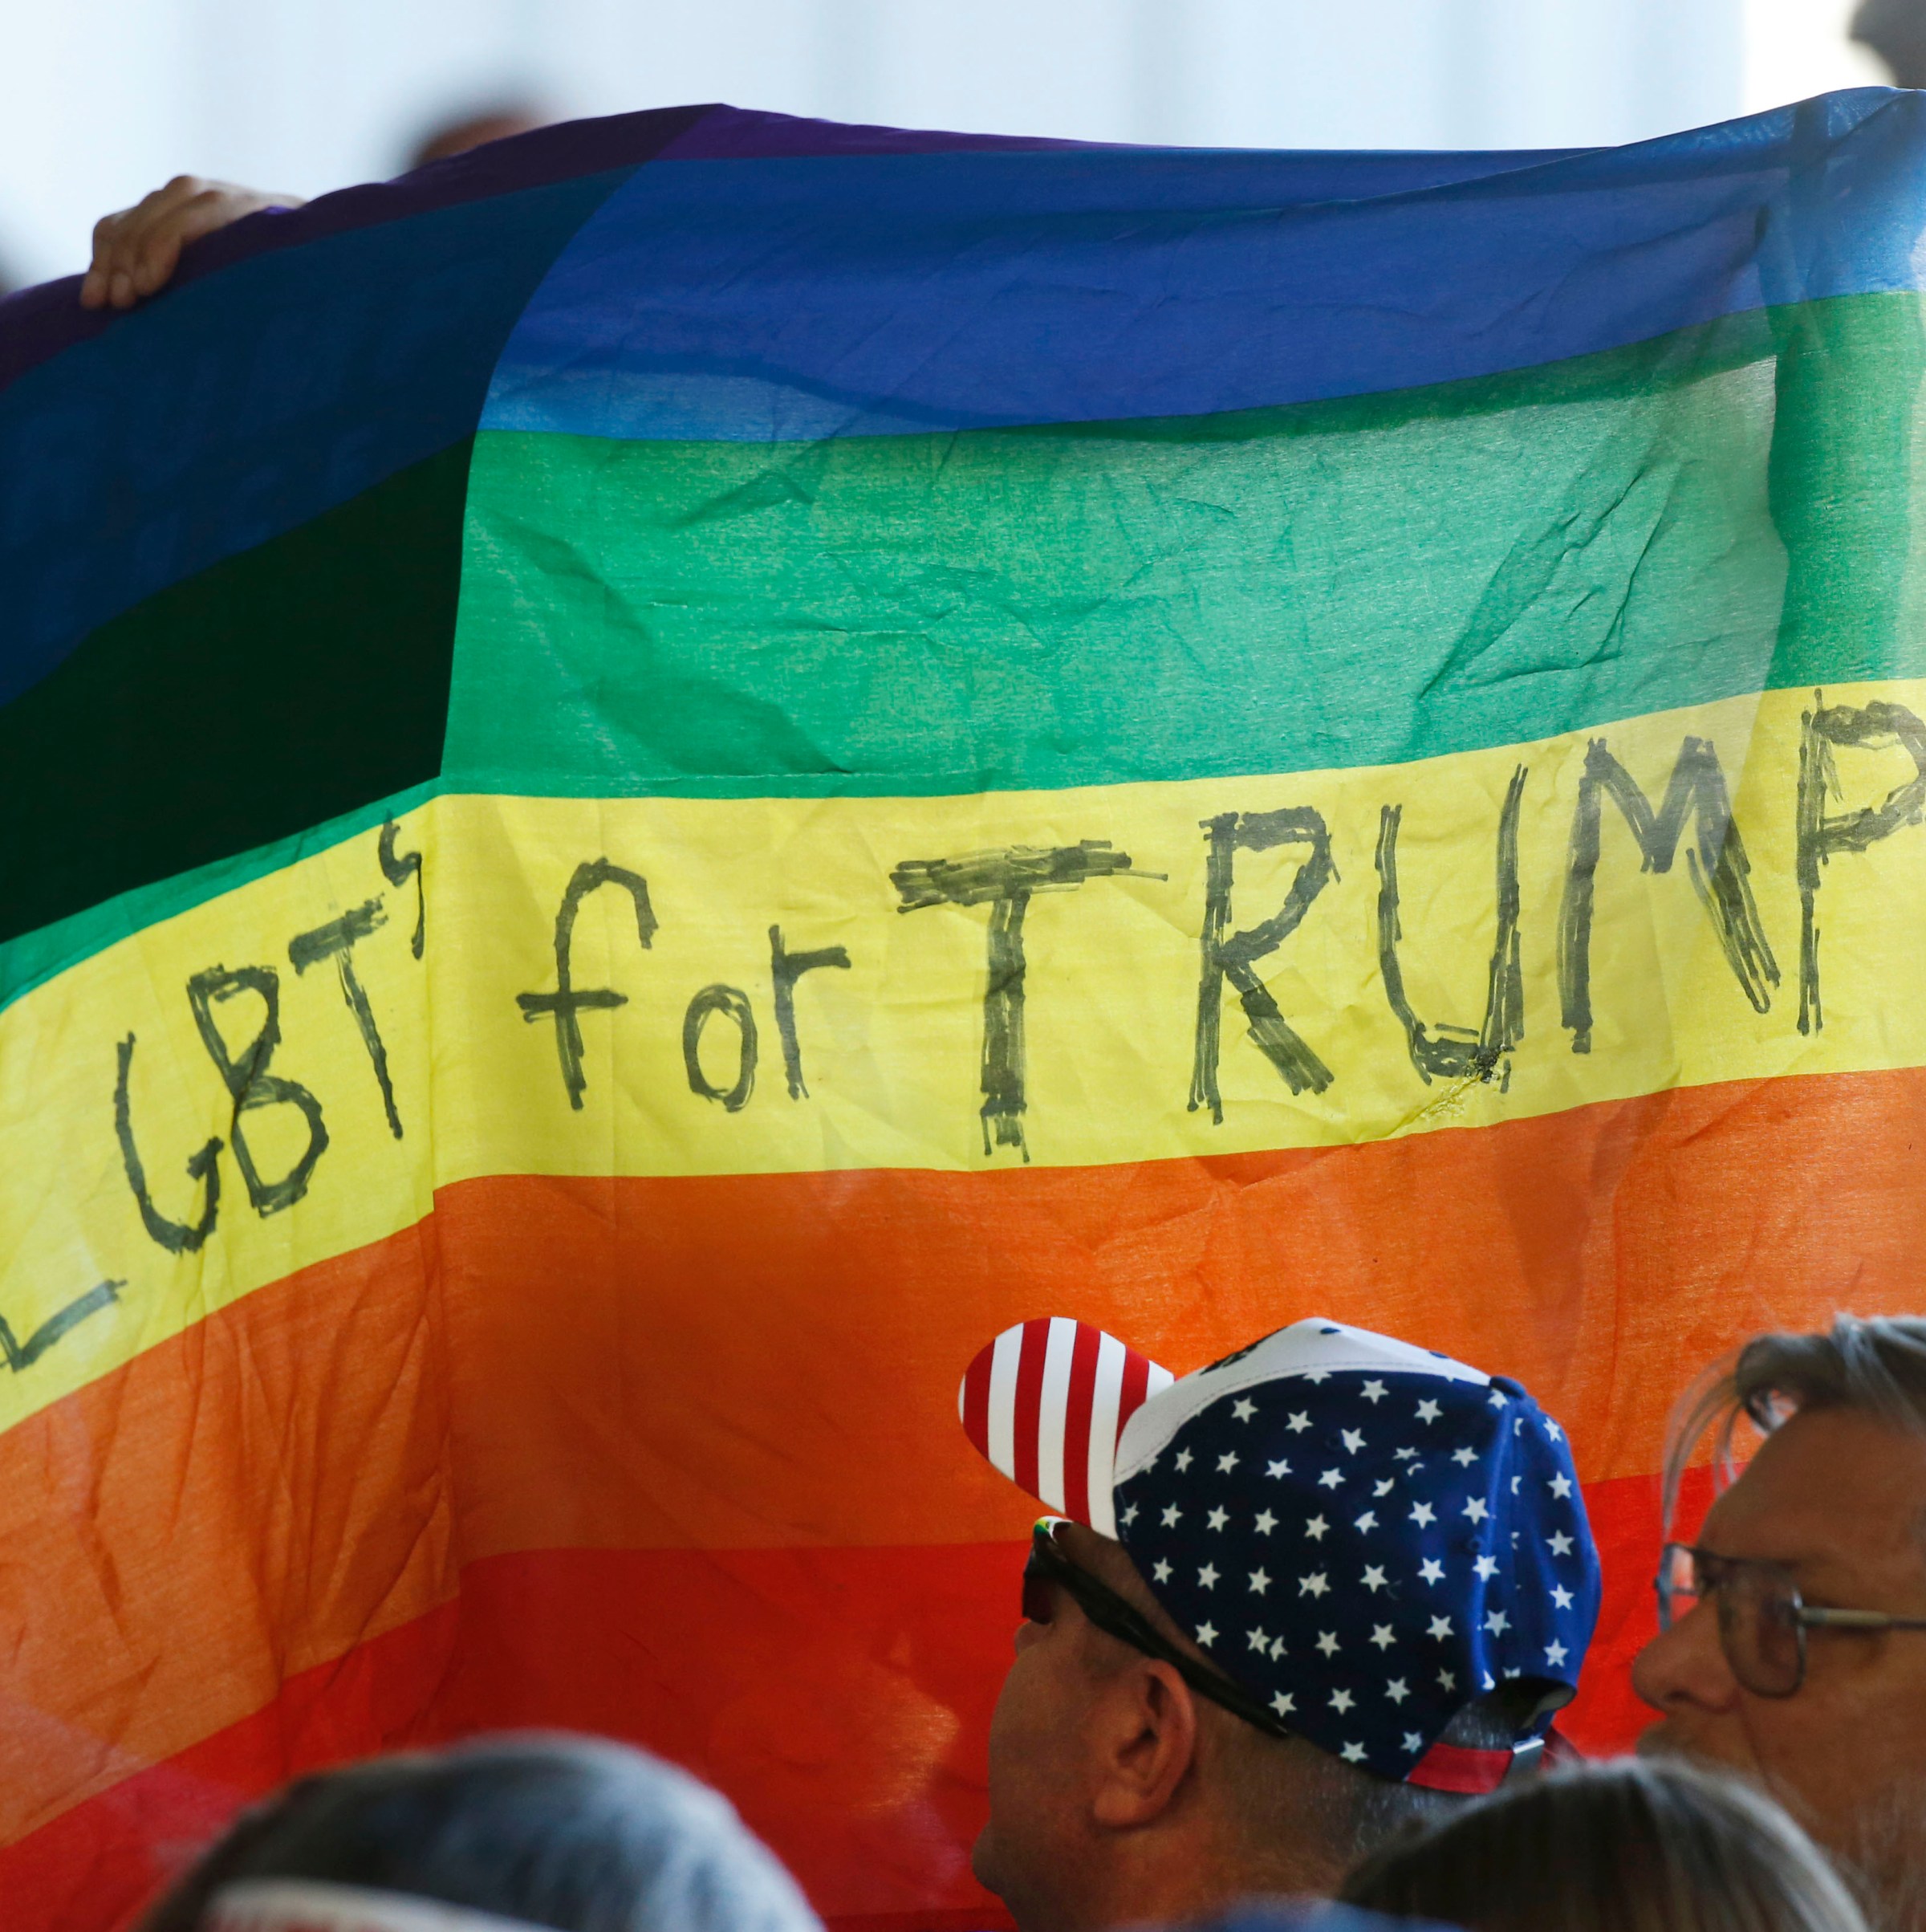 What the rise of queer Republicans tells us about America